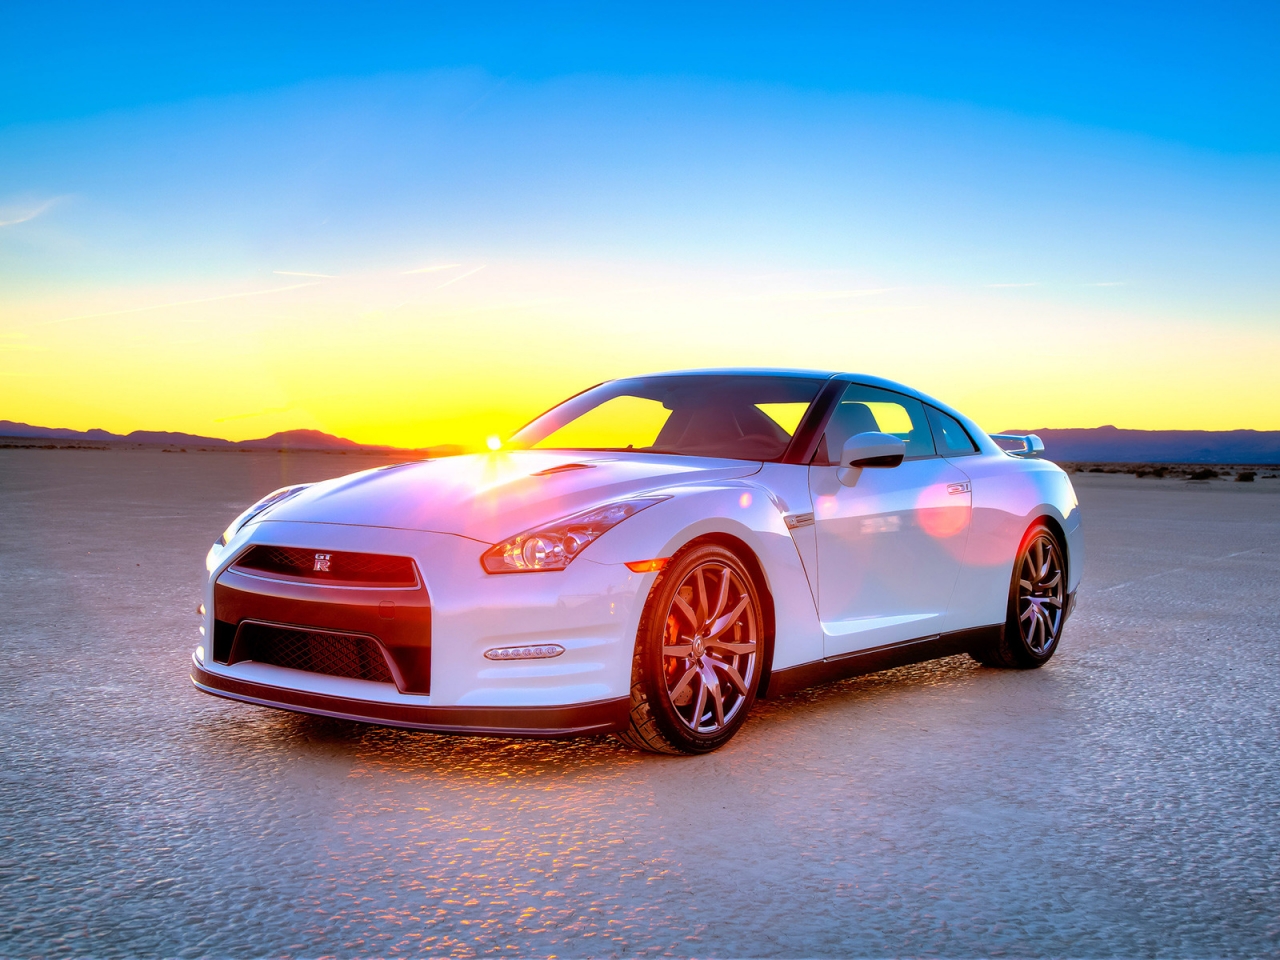 White Nissan GT-R 2014 Edition for 1280 x 960 resolution